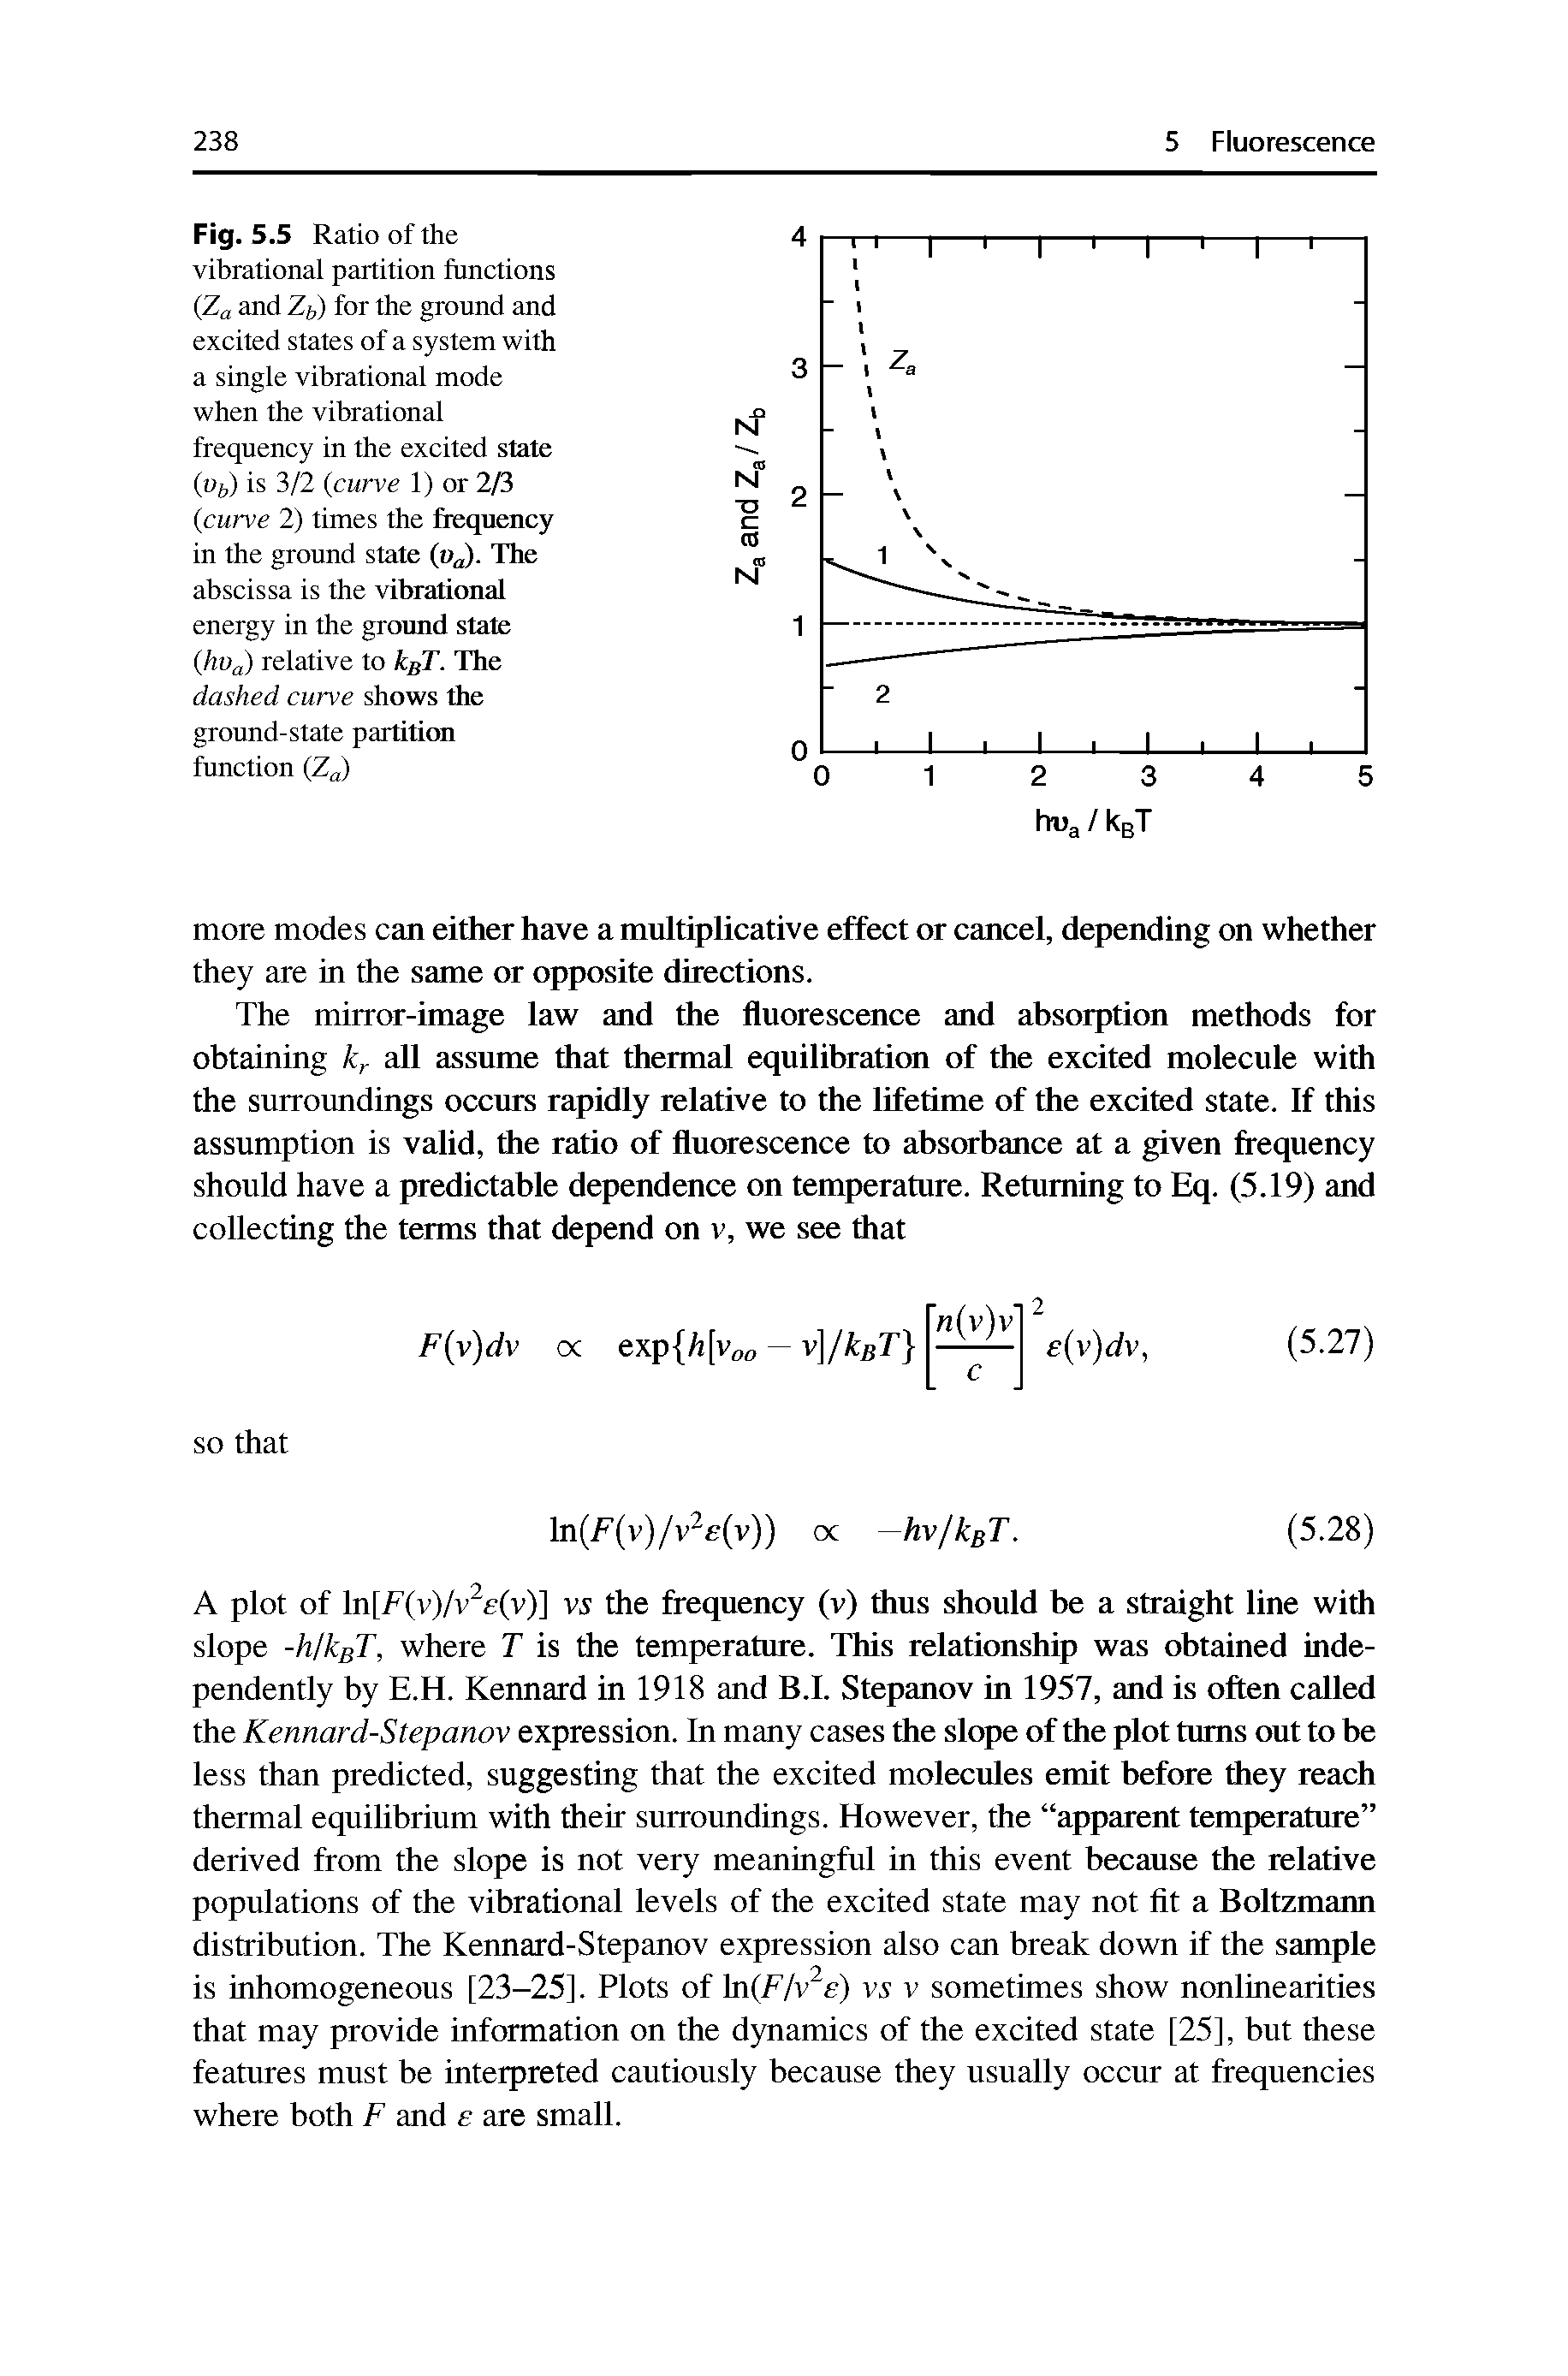 Fig. 5.5 Ratio of the vibrational partition functions (Za and Zj) for the ground and excited states of a system with a single vibrational mode when the vibrational frequency in the excited state (Ofe) is 3/2 (curve 1) or Ifi (curve 2) times the fiequency in the ground state (v. The abscissa is the vibrational energy in the ground state (hVc relative to k. The dashed curve shows the ground-state partitirai function (Z )...